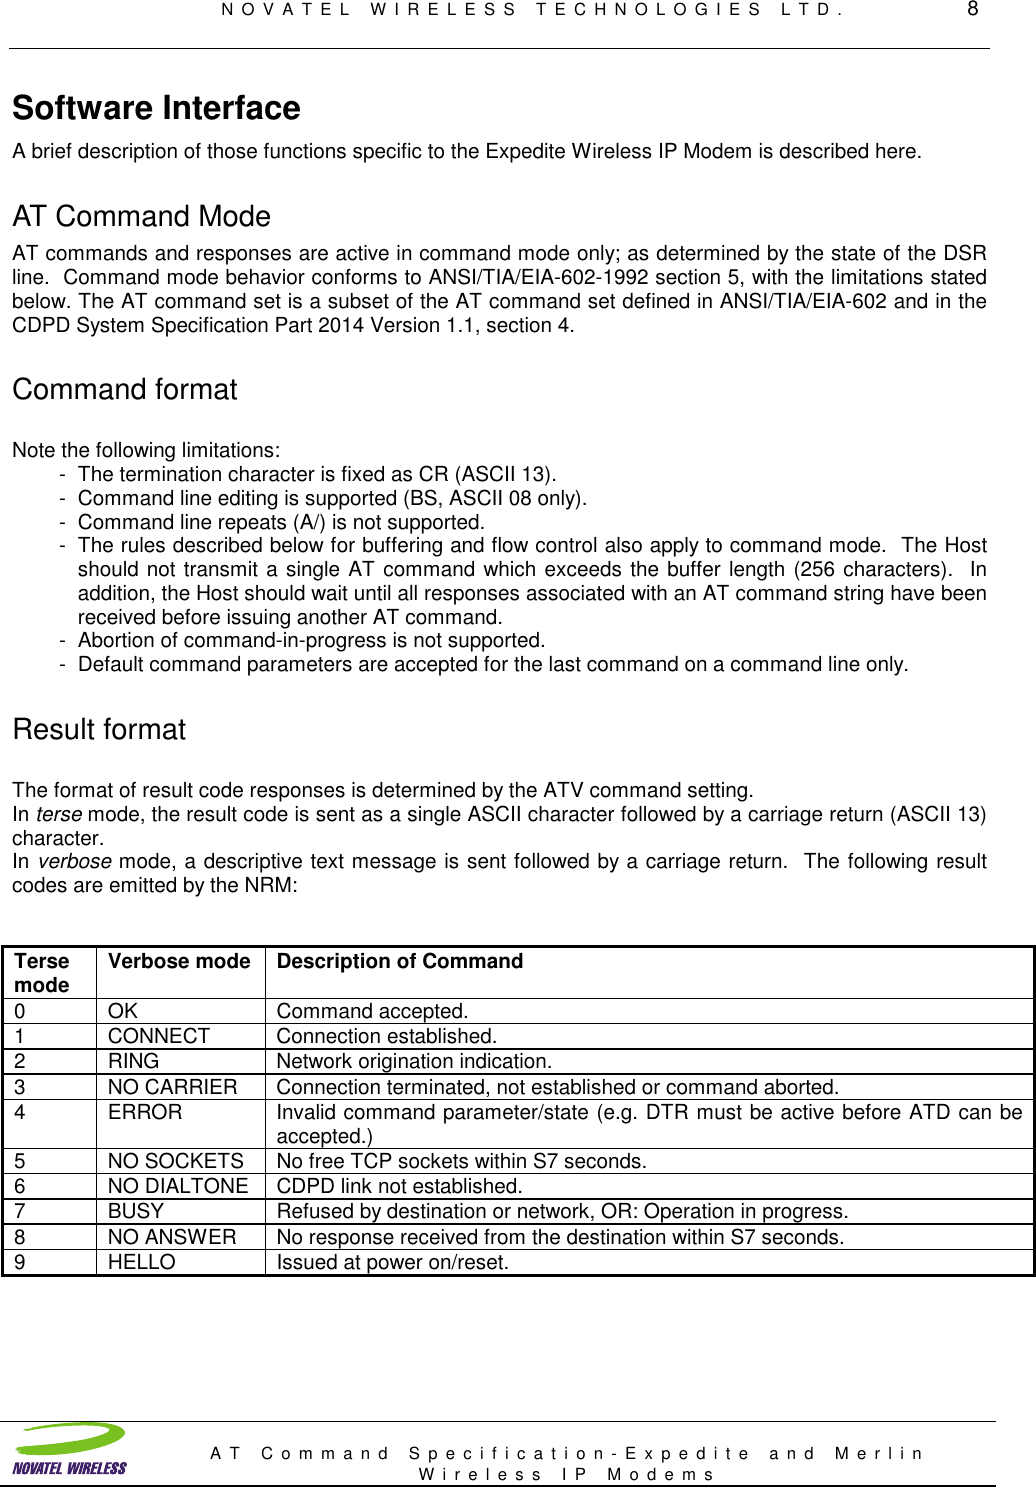 NOVATEL WIRELESS TECHNOLOGIES LTD.         8AT Command Specification-Expedite and MerlinWireless IP ModemsSoftware InterfaceA brief description of those functions specific to the Expedite Wireless IP Modem is described here.AT Command ModeAT commands and responses are active in command mode only; as determined by the state of the DSRline.  Command mode behavior conforms to ANSI/TIA/EIA-602-1992 section 5, with the limitations statedbelow. The AT command set is a subset of the AT command set defined in ANSI/TIA/EIA-602 and in theCDPD System Specification Part 2014 Version 1.1, section 4.Command formatNote the following limitations:- The termination character is fixed as CR (ASCII 13).- Command line editing is supported (BS, ASCII 08 only).- Command line repeats (A/) is not supported.- The rules described below for buffering and flow control also apply to command mode.  The Hostshould not transmit a single AT command which exceeds the buffer length (256 characters).  Inaddition, the Host should wait until all responses associated with an AT command string have beenreceived before issuing another AT command.- Abortion of command-in-progress is not supported.- Default command parameters are accepted for the last command on a command line only.Result formatThe format of result code responses is determined by the ATV command setting.In terse mode, the result code is sent as a single ASCII character followed by a carriage return (ASCII 13)character.In verbose mode, a descriptive text message is sent followed by a carriage return.  The following resultcodes are emitted by the NRM:Tersemode Verbose mode Description of Command0 OK Command accepted.1 CONNECT Connection established.2 RING Network origination indication.3 NO CARRIER Connection terminated, not established or command aborted.4 ERROR Invalid command parameter/state (e.g. DTR must be active before ATD can beaccepted.)5 NO SOCKETS No free TCP sockets within S7 seconds.6 NO DIALTONE CDPD link not established.7 BUSY Refused by destination or network, OR: Operation in progress.8 NO ANSWER No response received from the destination within S7 seconds.9 HELLO Issued at power on/reset.